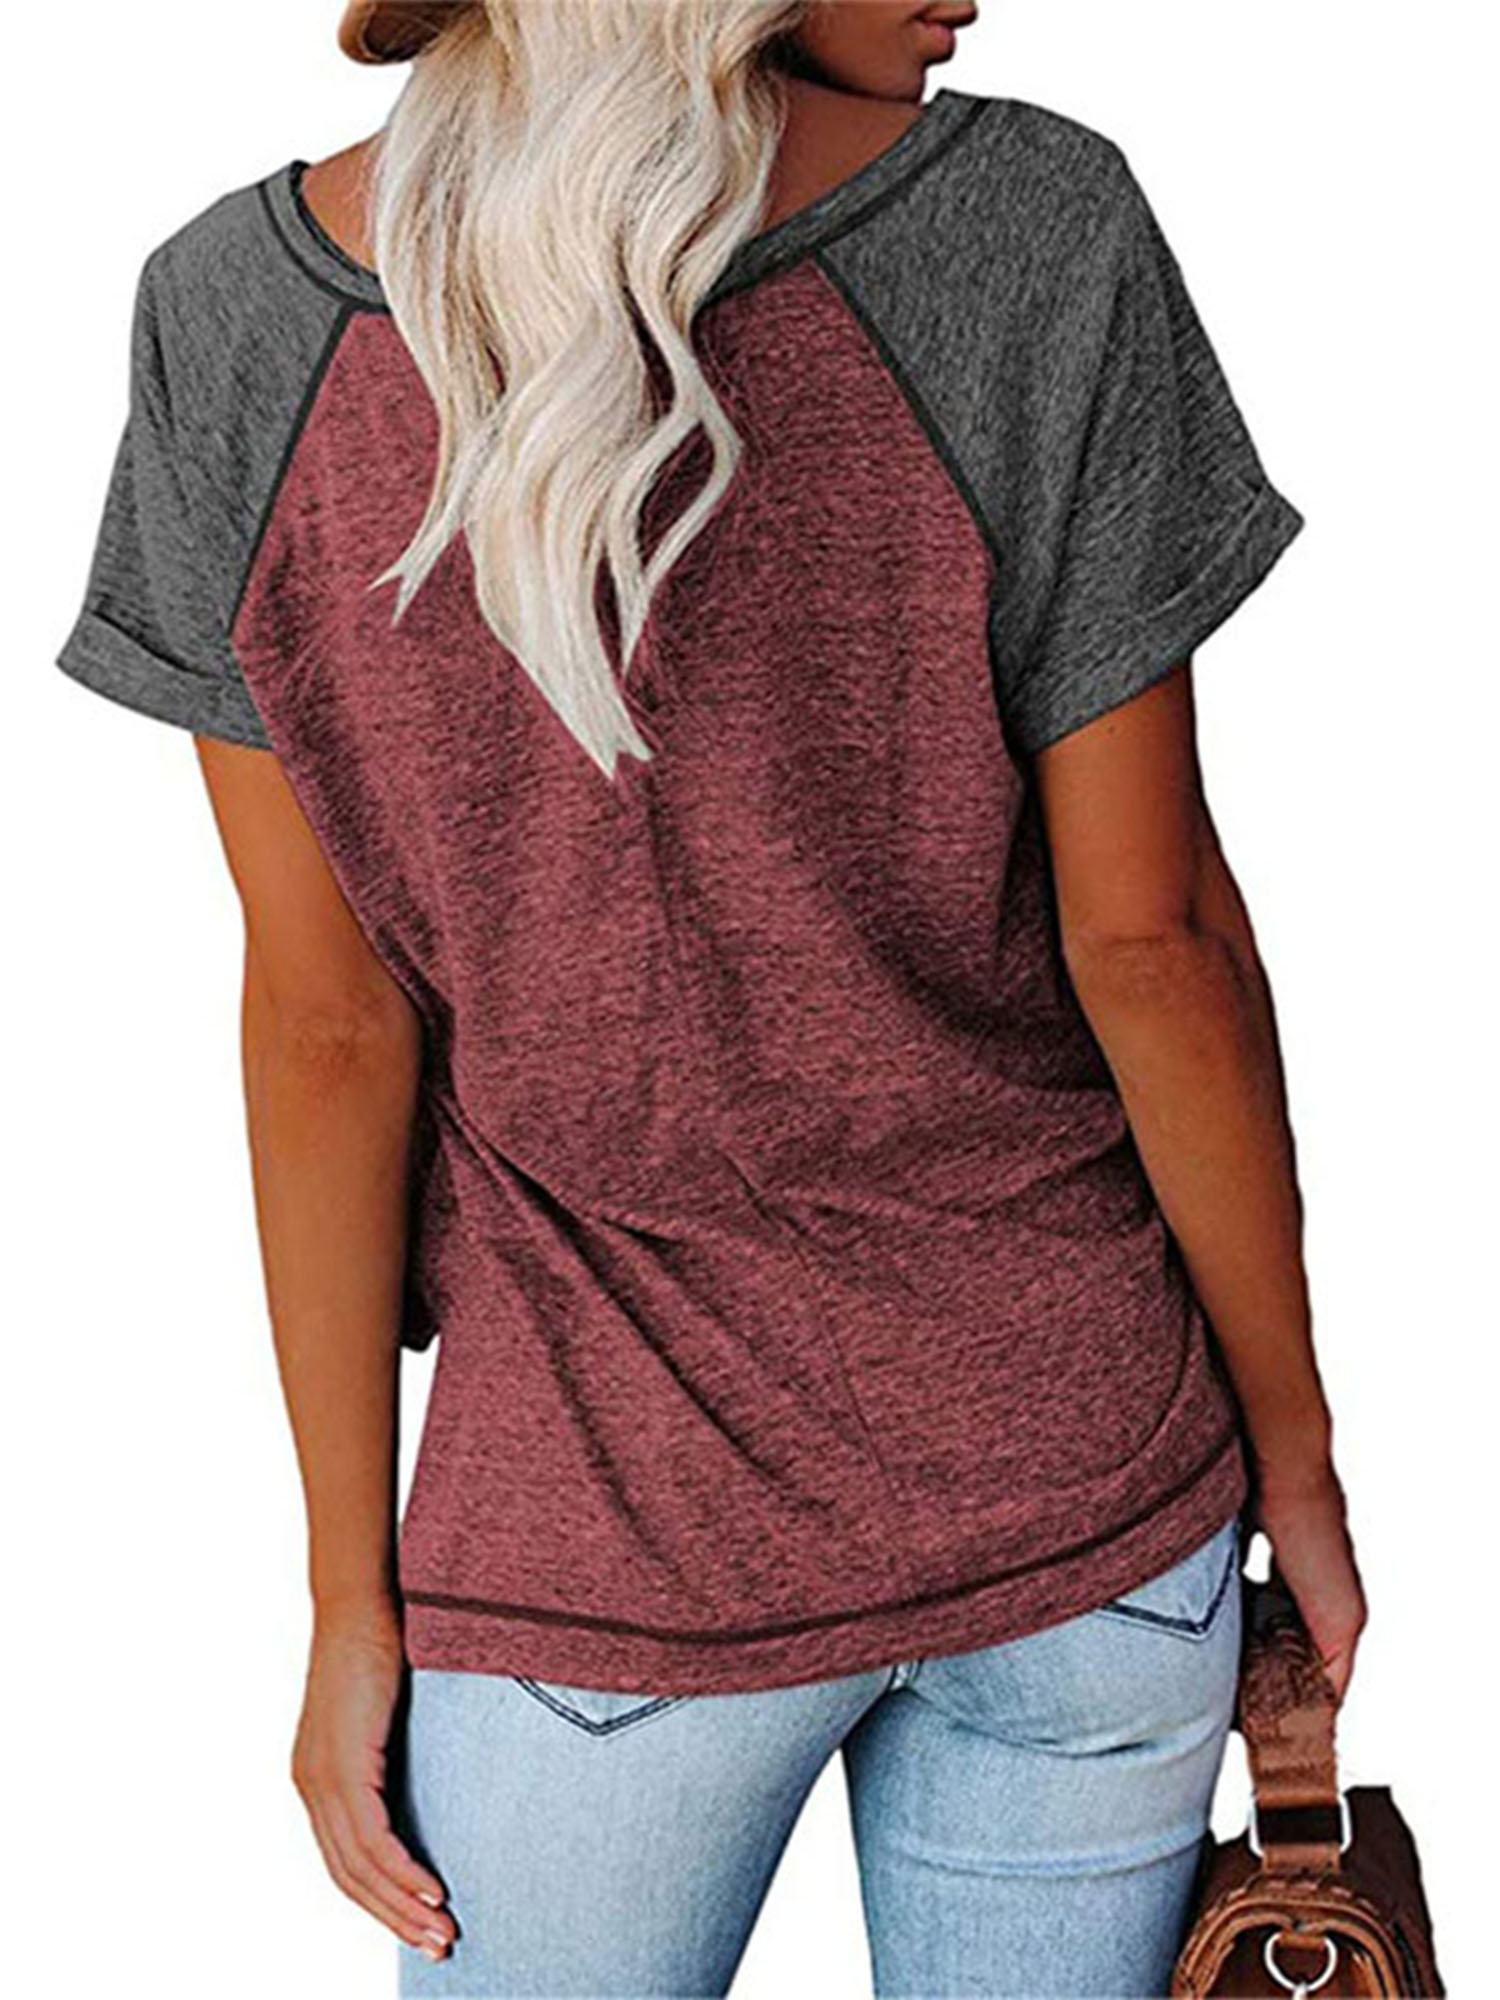 Women Ladies Casual Tops Short Sleeve Color Block T-shirt V Neck Tunic Blouse Tee Ladies Stylish Sport Athletic Tops - image 3 of 3